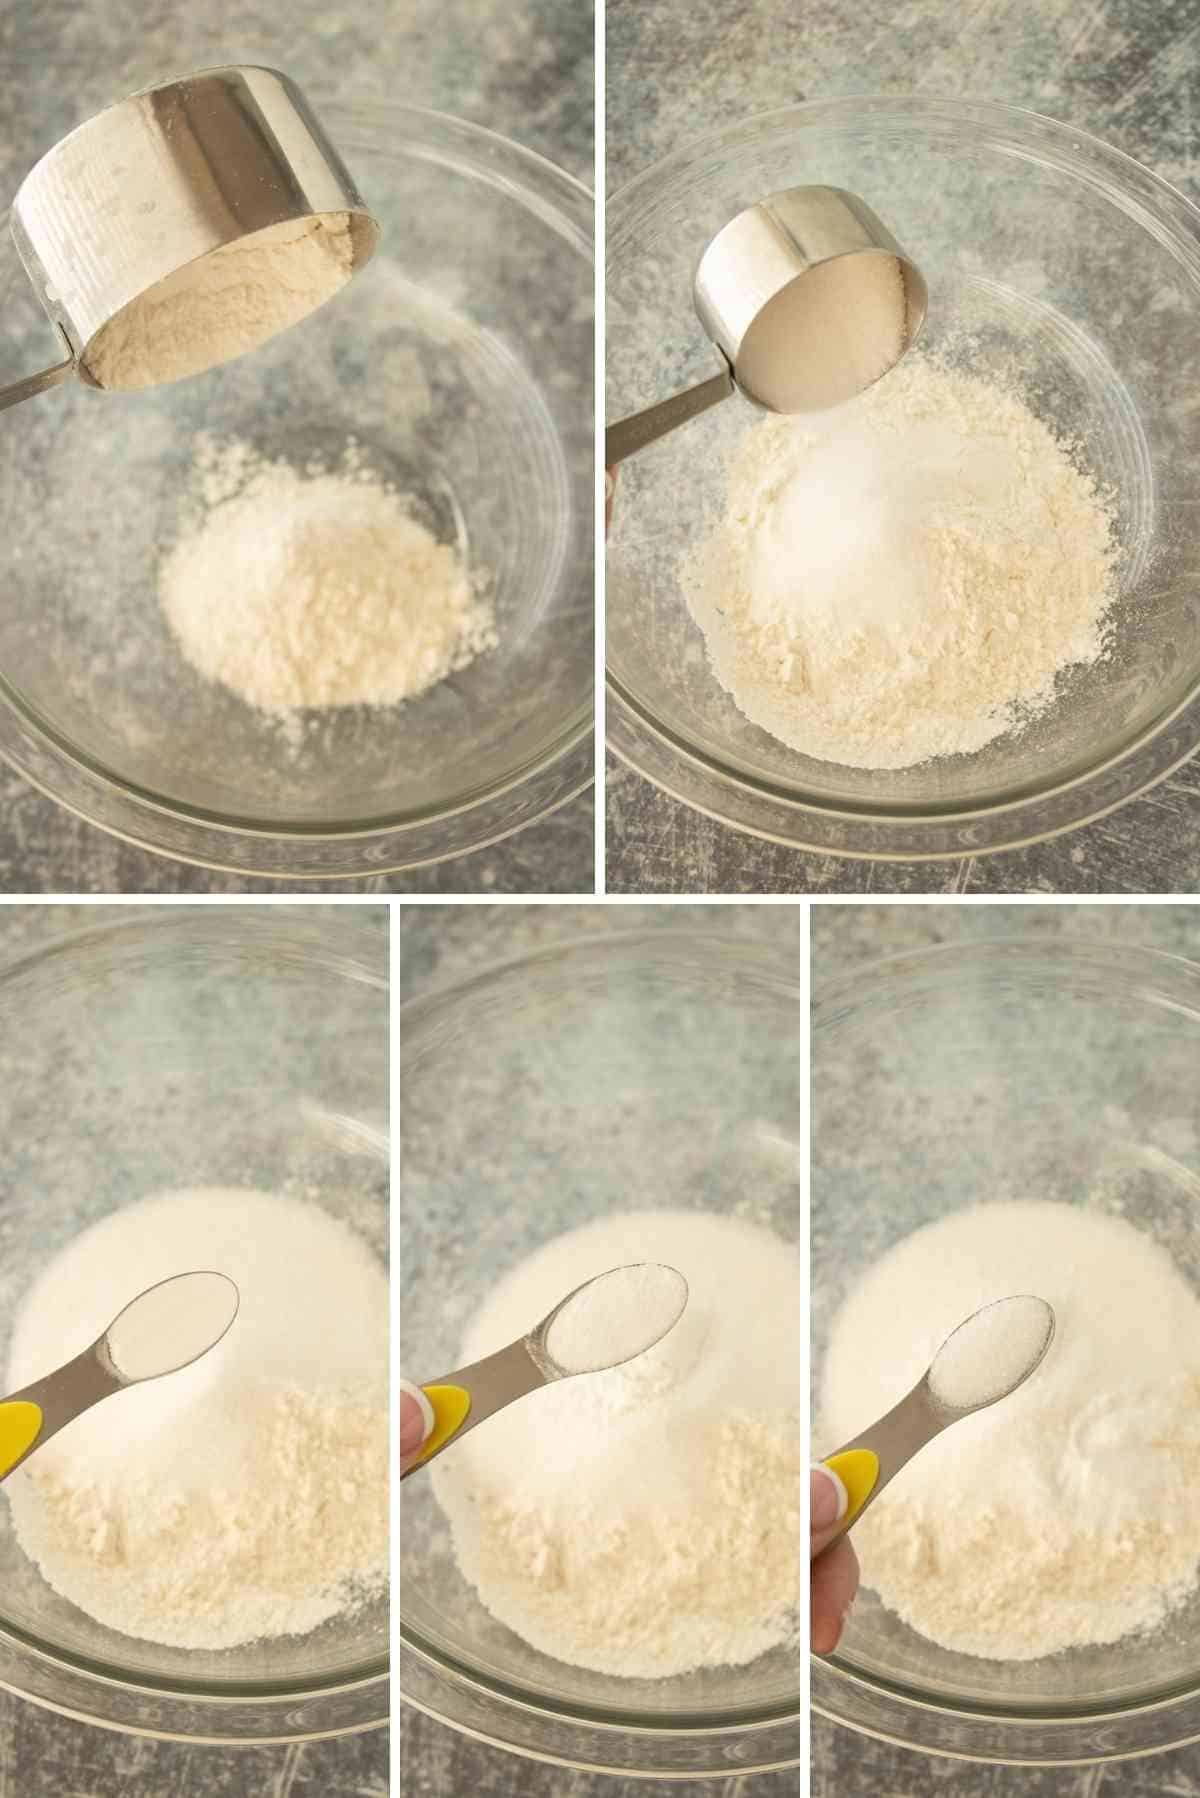 Whisk together the dry ingredients!